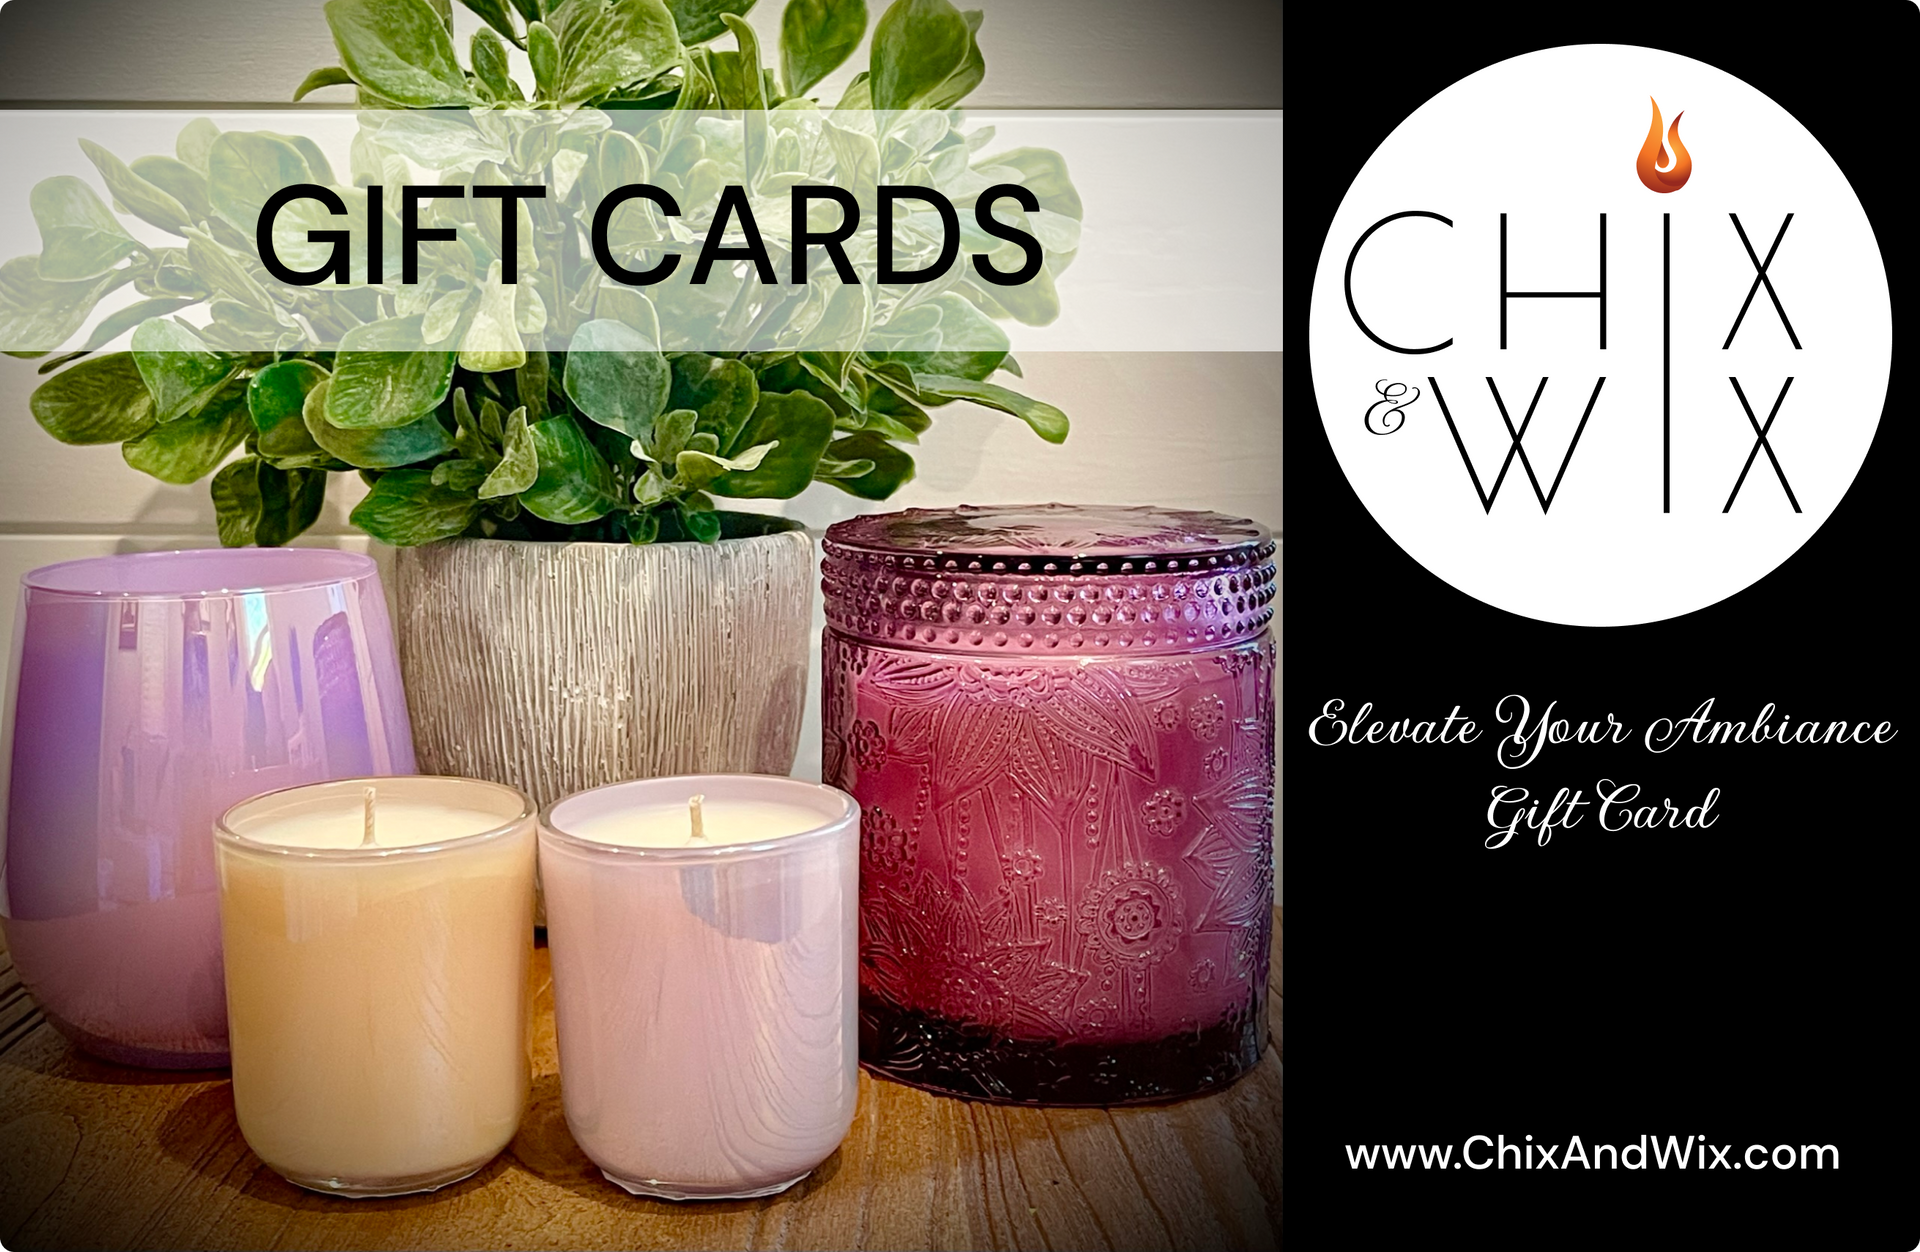 Chix and Wix Gift Cards